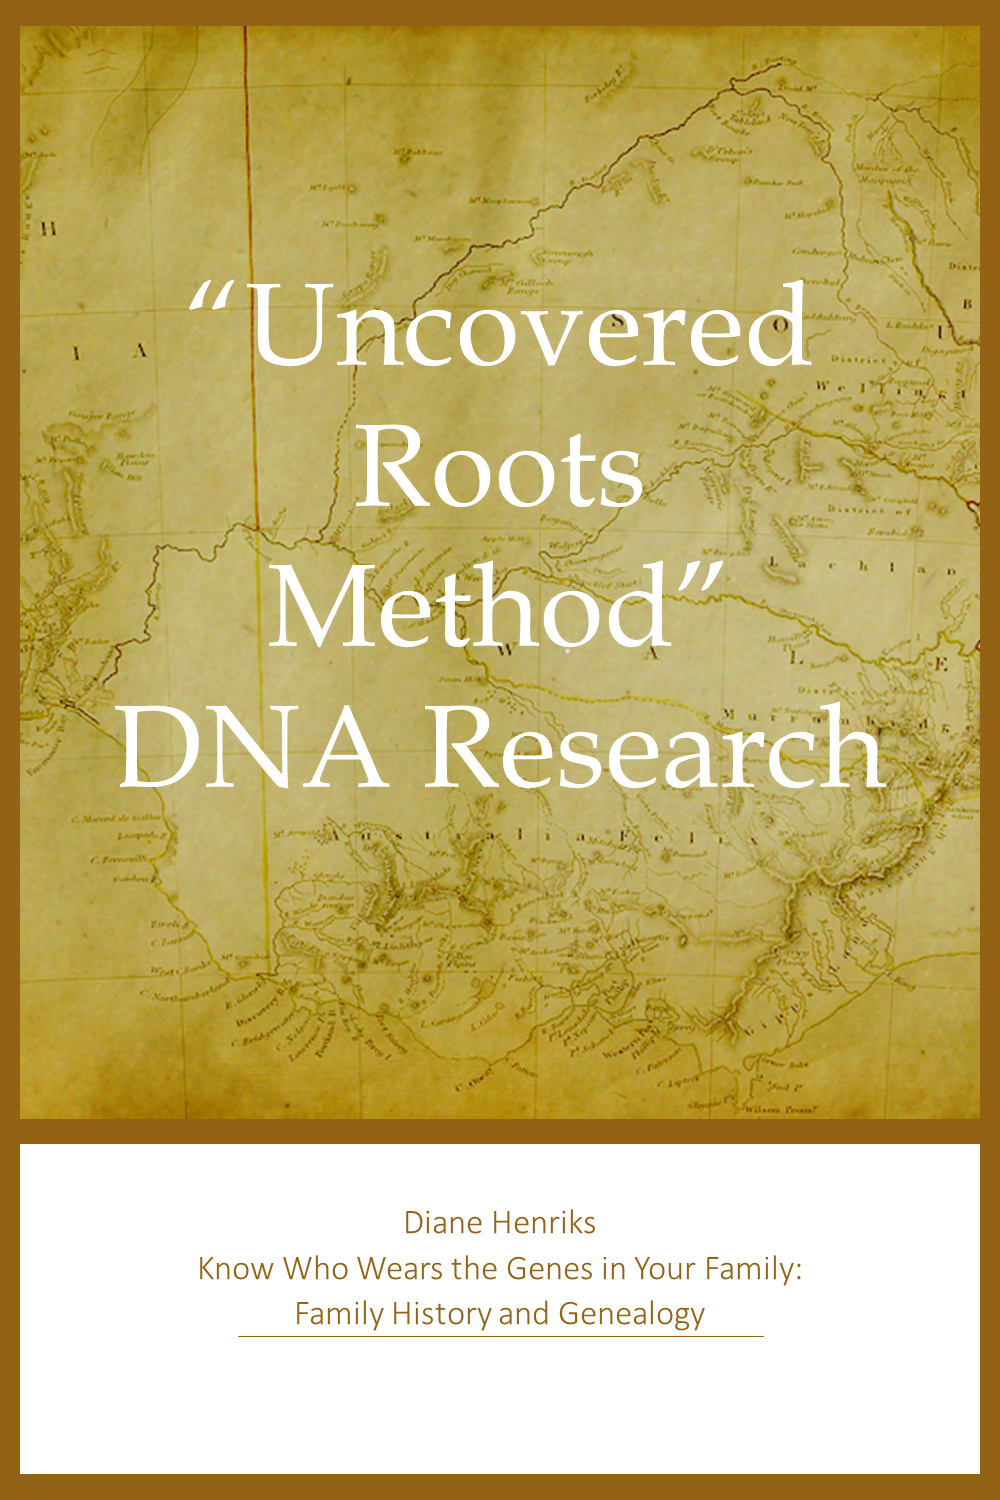 DNA and Genealogy Research by Diane Henriks at Know Who Wears the Genes in Your Family